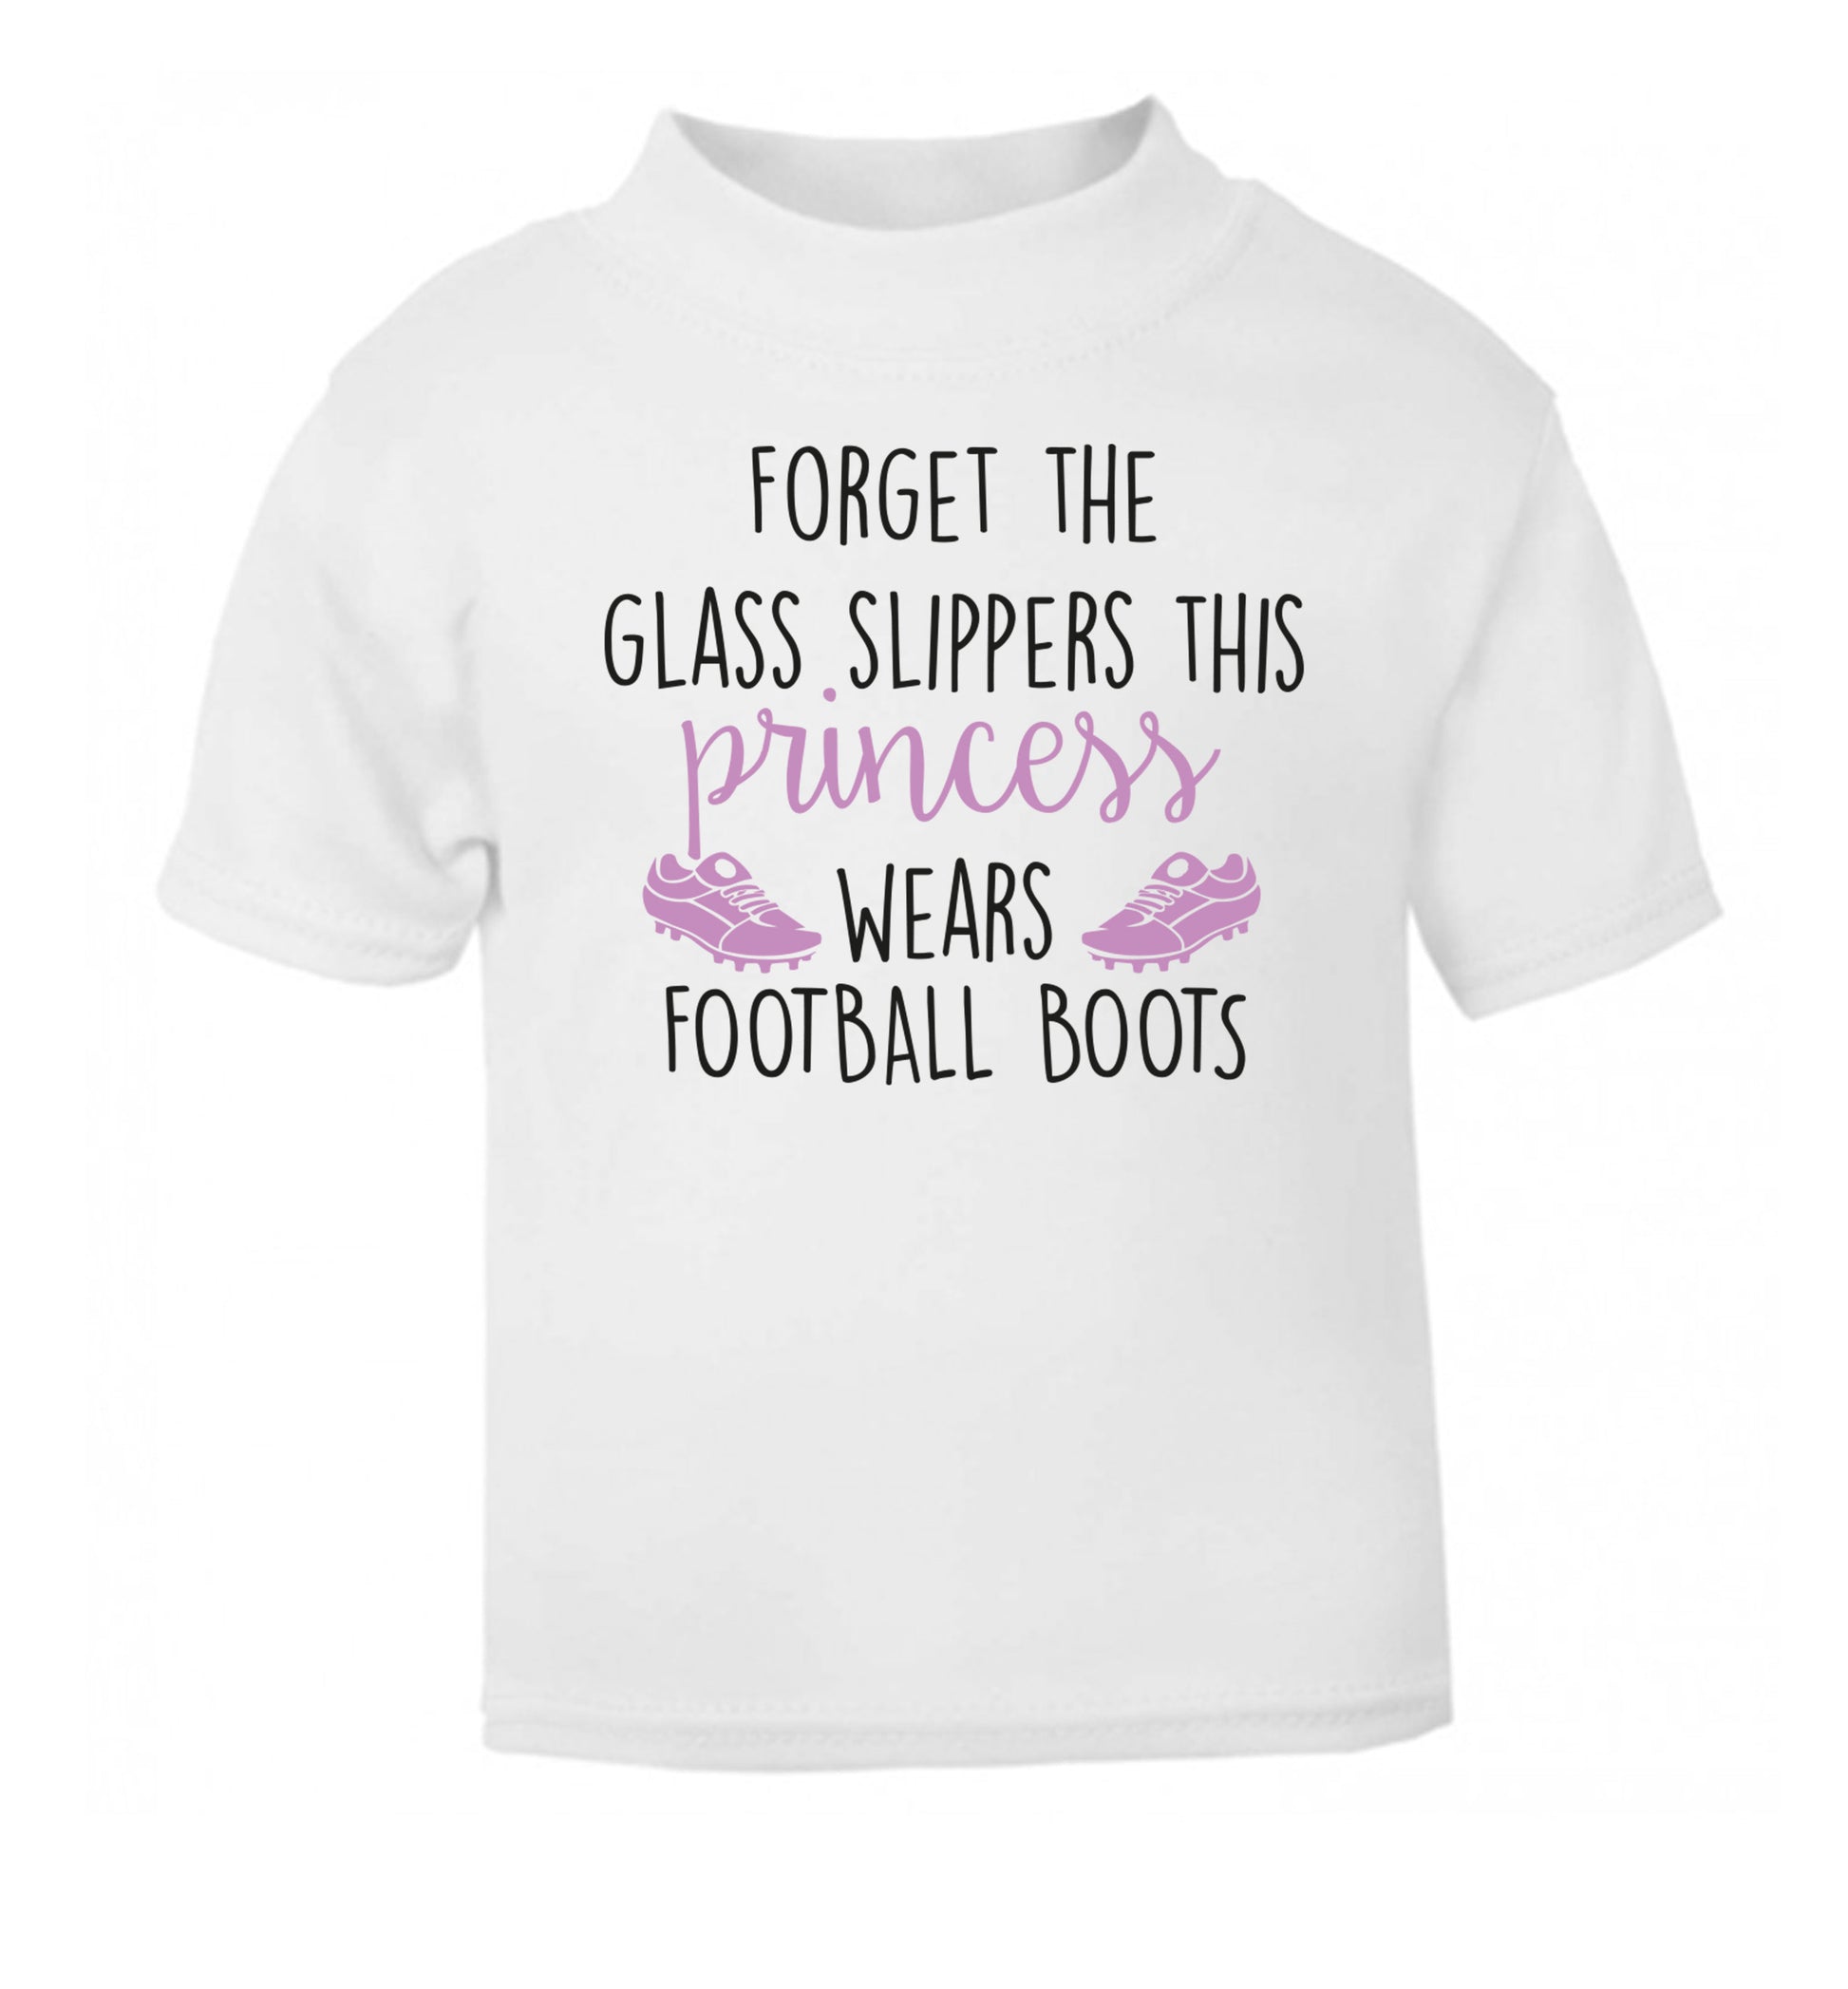 Forget the glass slippers this princess wears football boots white Baby Toddler Tshirt 2 Years